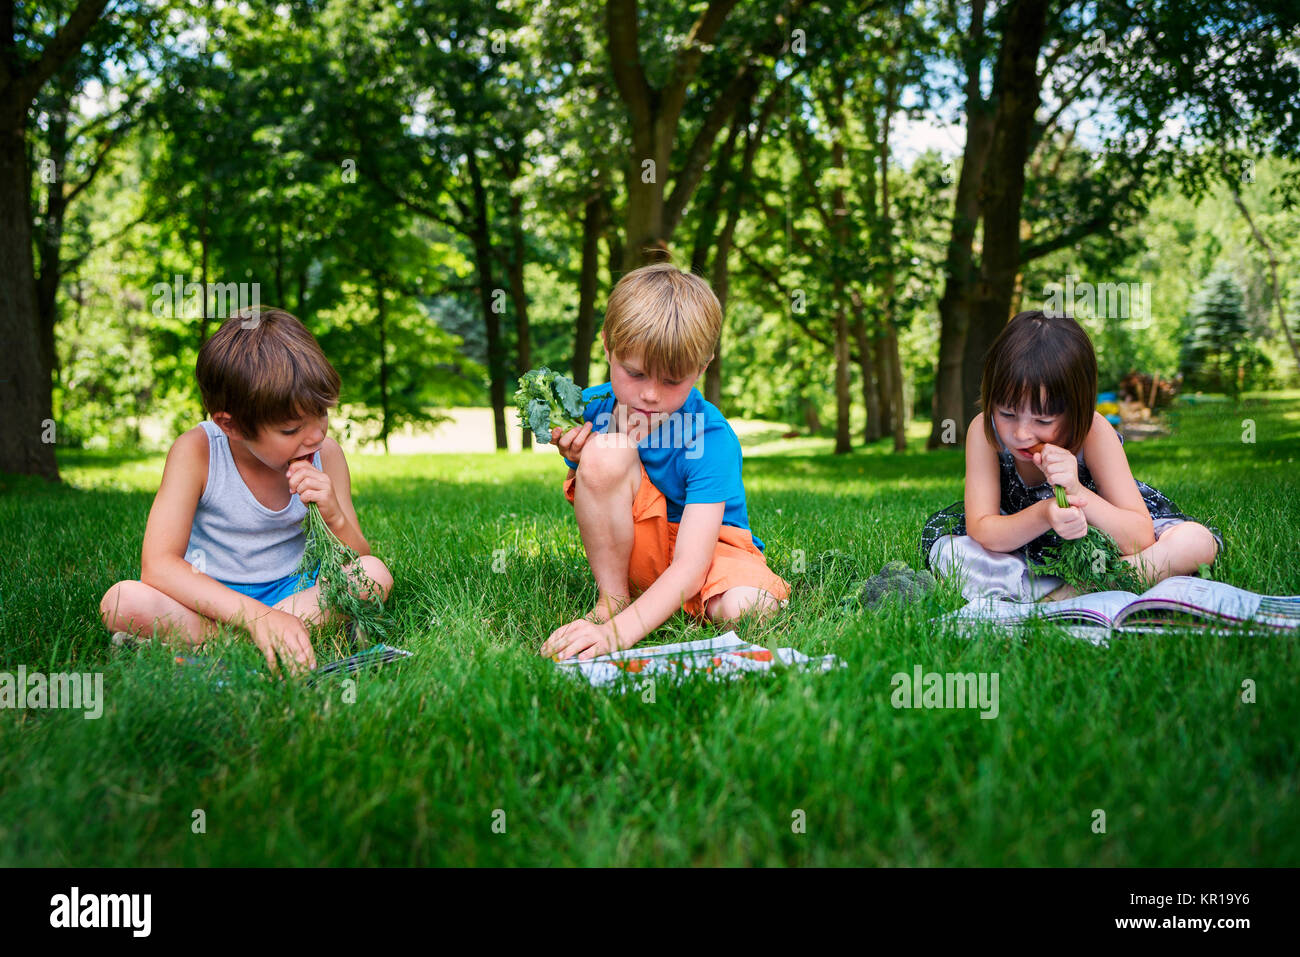 Three children sitting in a garden reading books and eating fresh vegetables Stock Photo